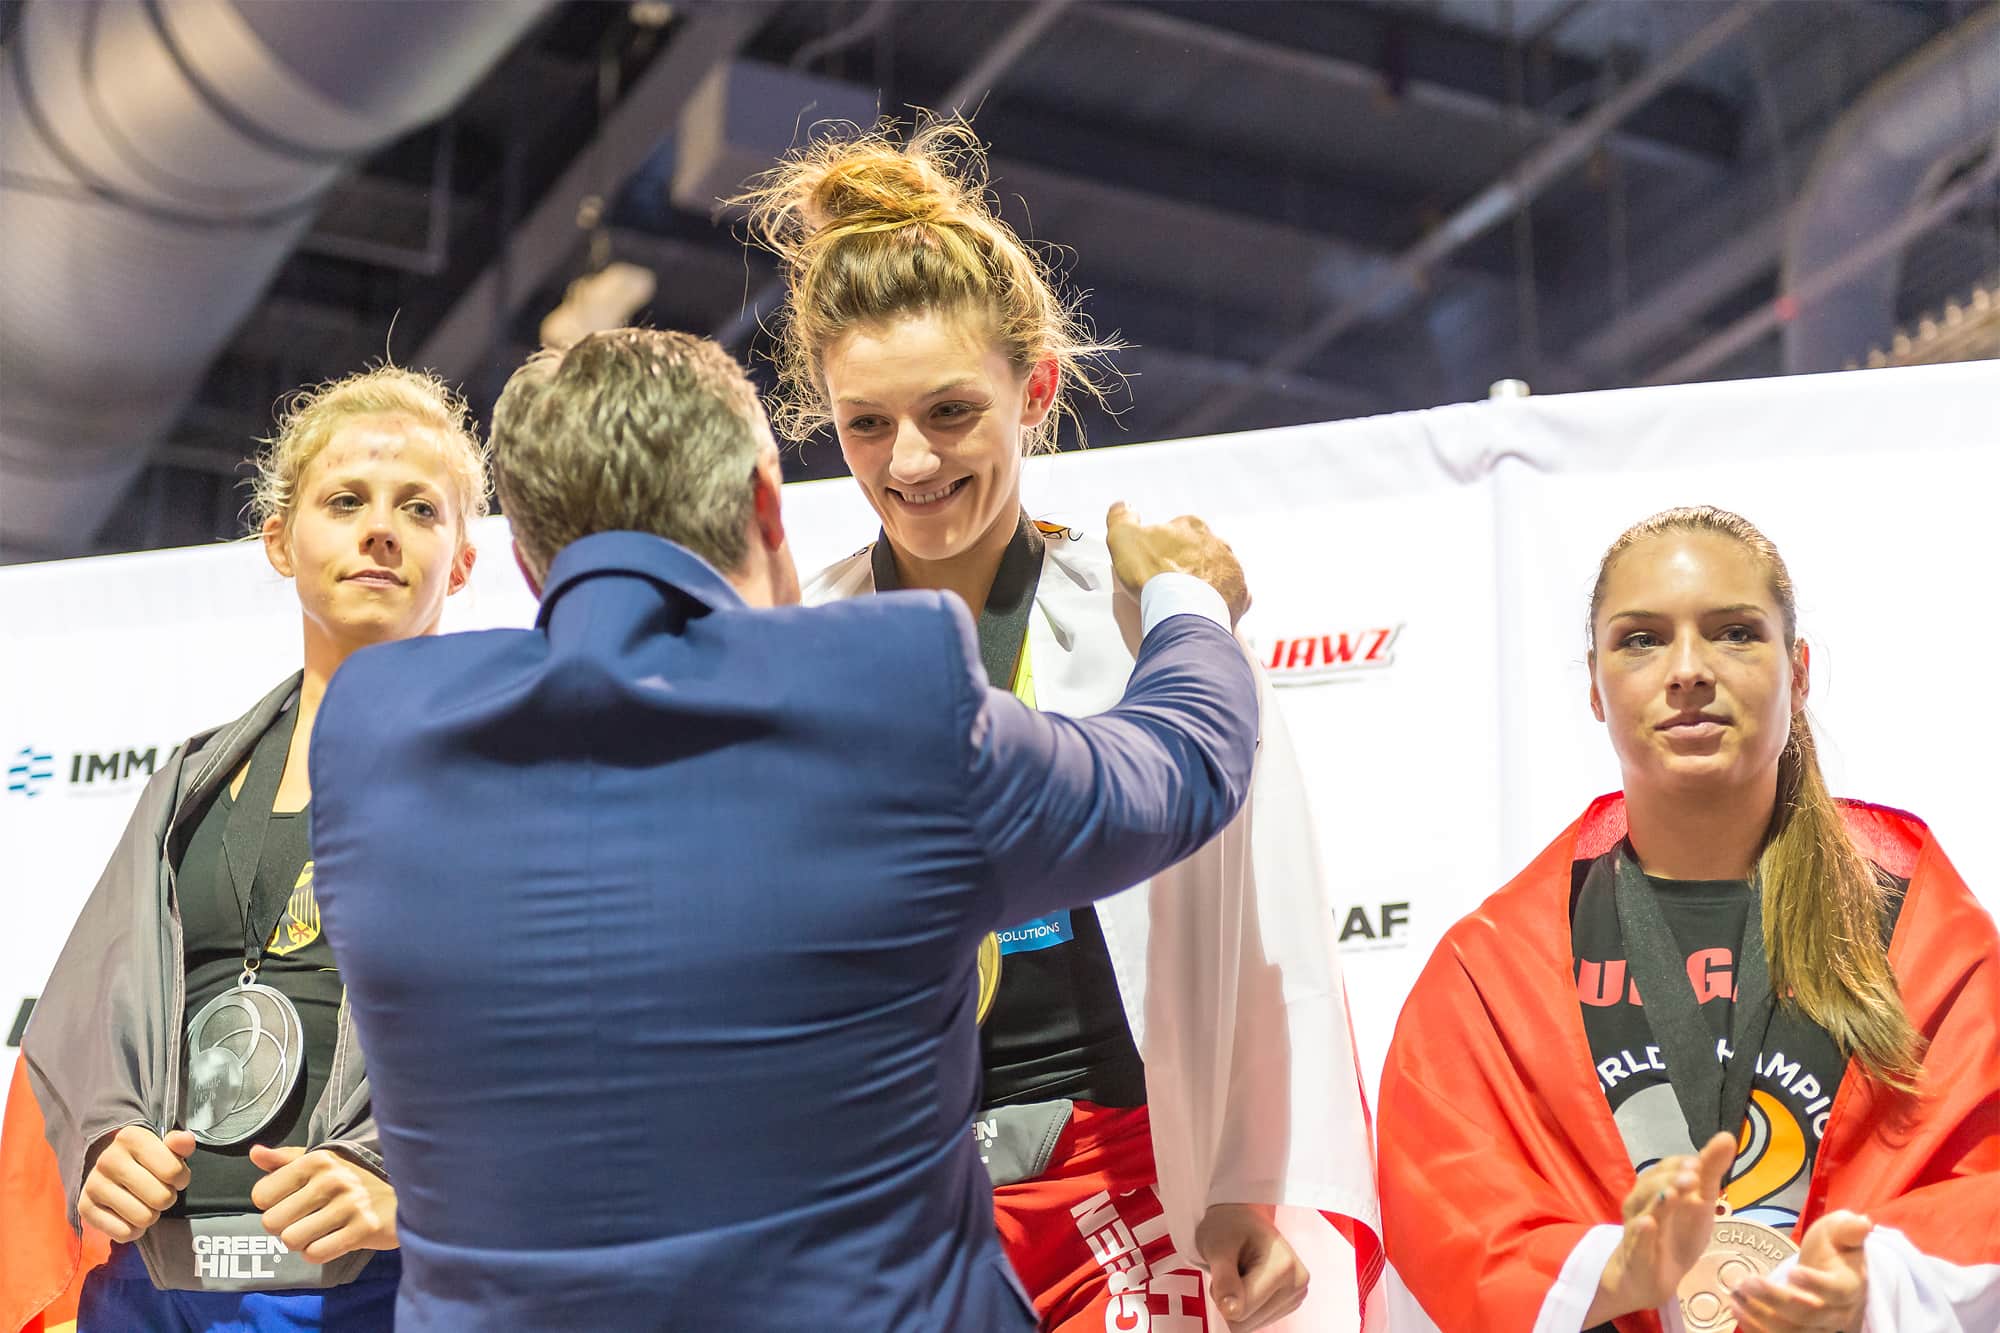 Leah McCourt returns to U.S soil for first time since winning 2016 IMMAF World gold medal